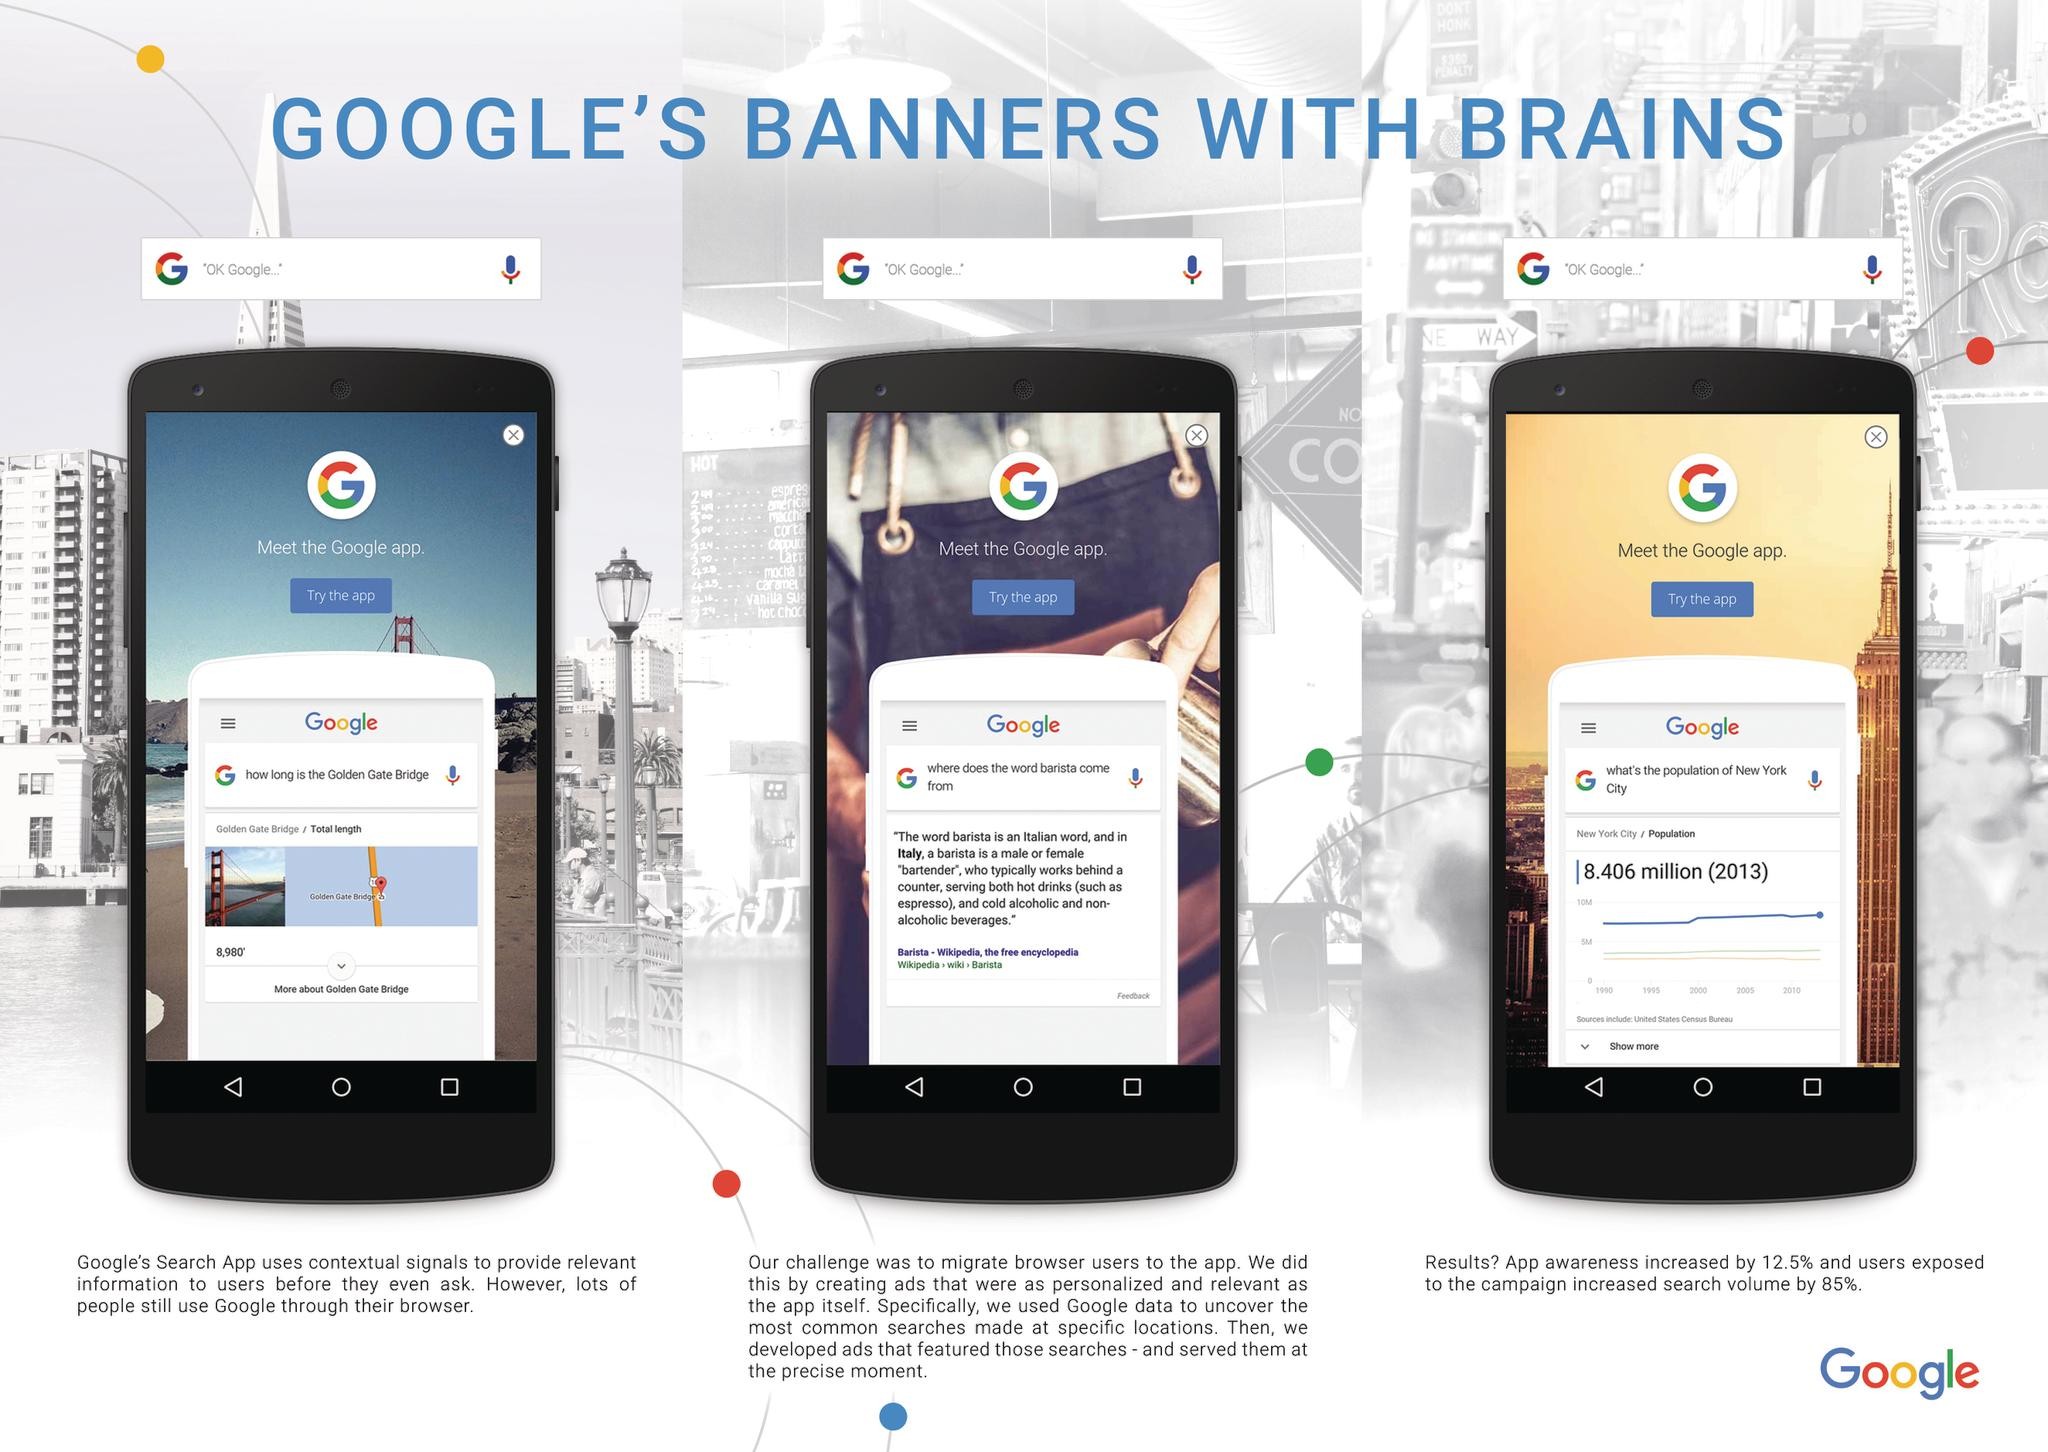 Google’s Banners with Brains